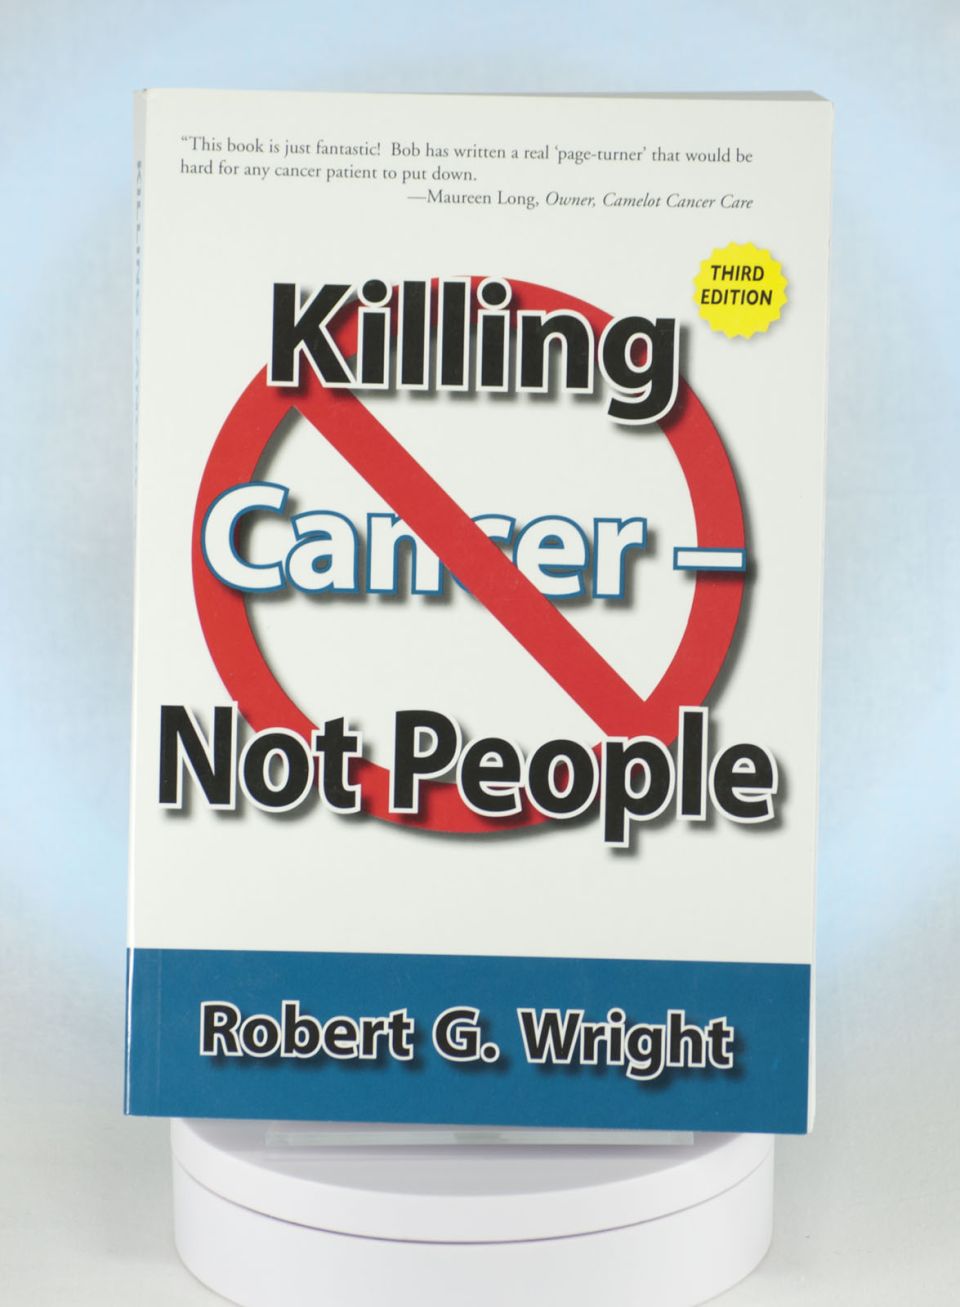 Killing Cancer Not People